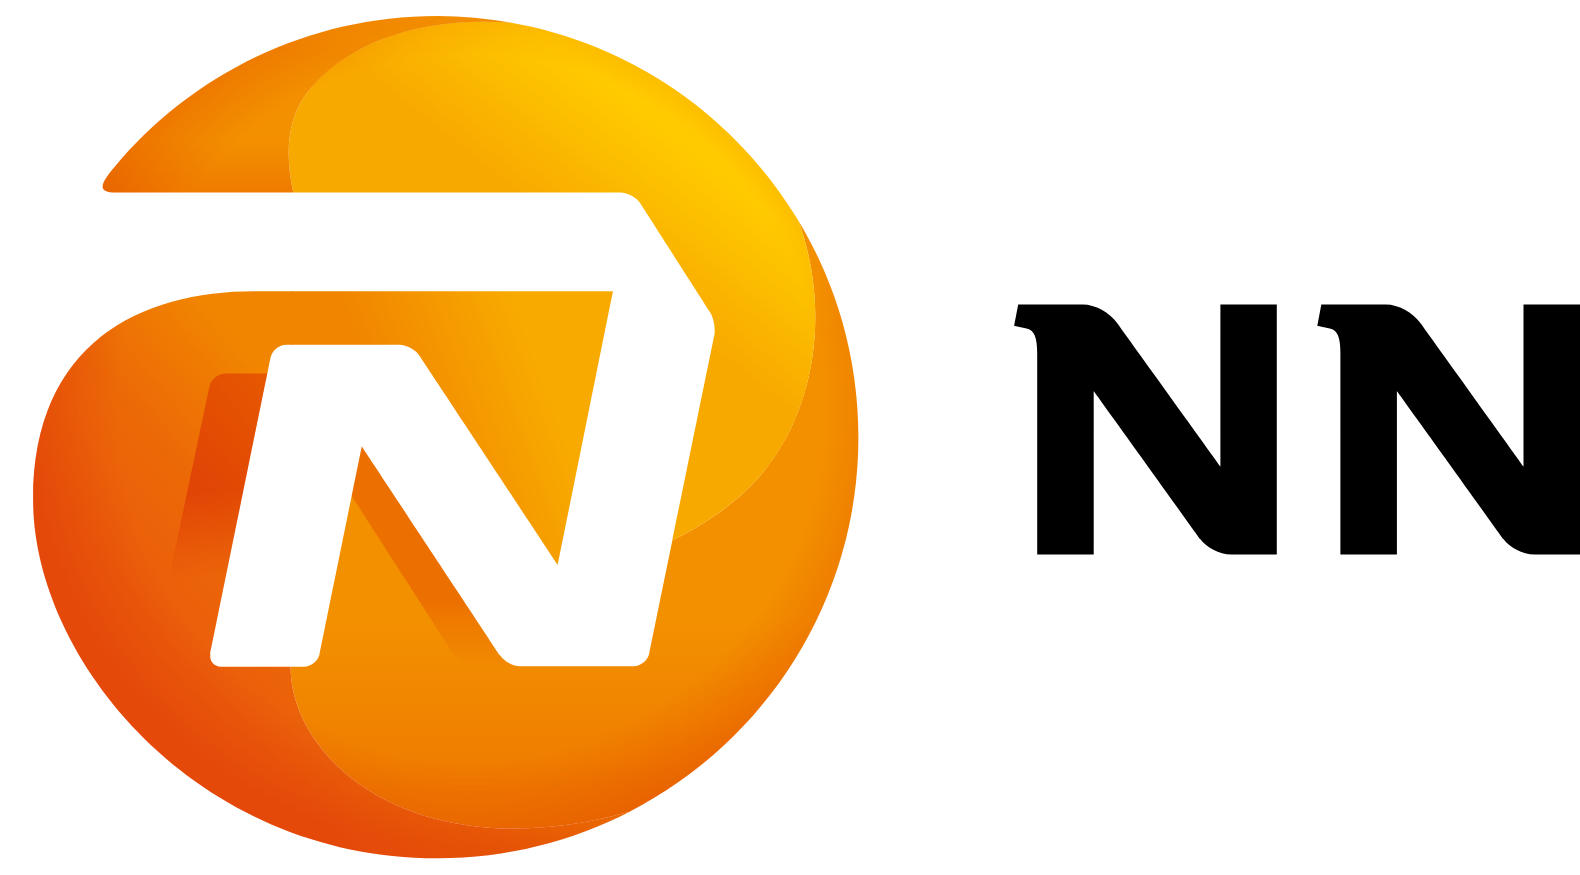 NN Group logo in transparent PNG and vectorized SVG formats